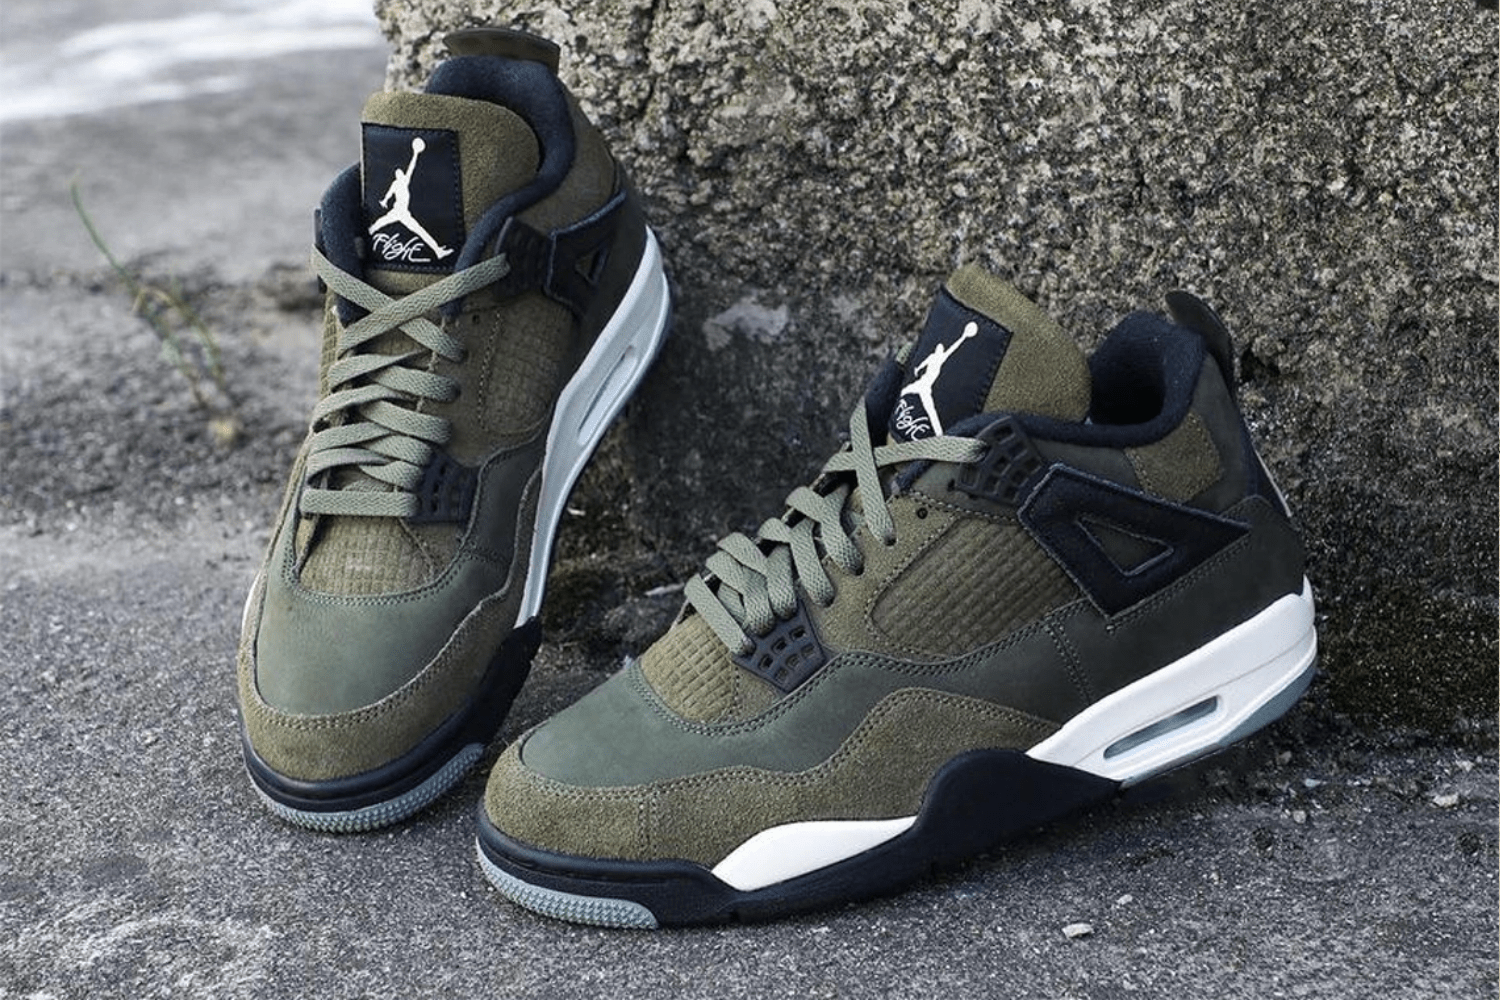 Take a look at the first images of the Air Jordan 4 SE Craft 'Olive'